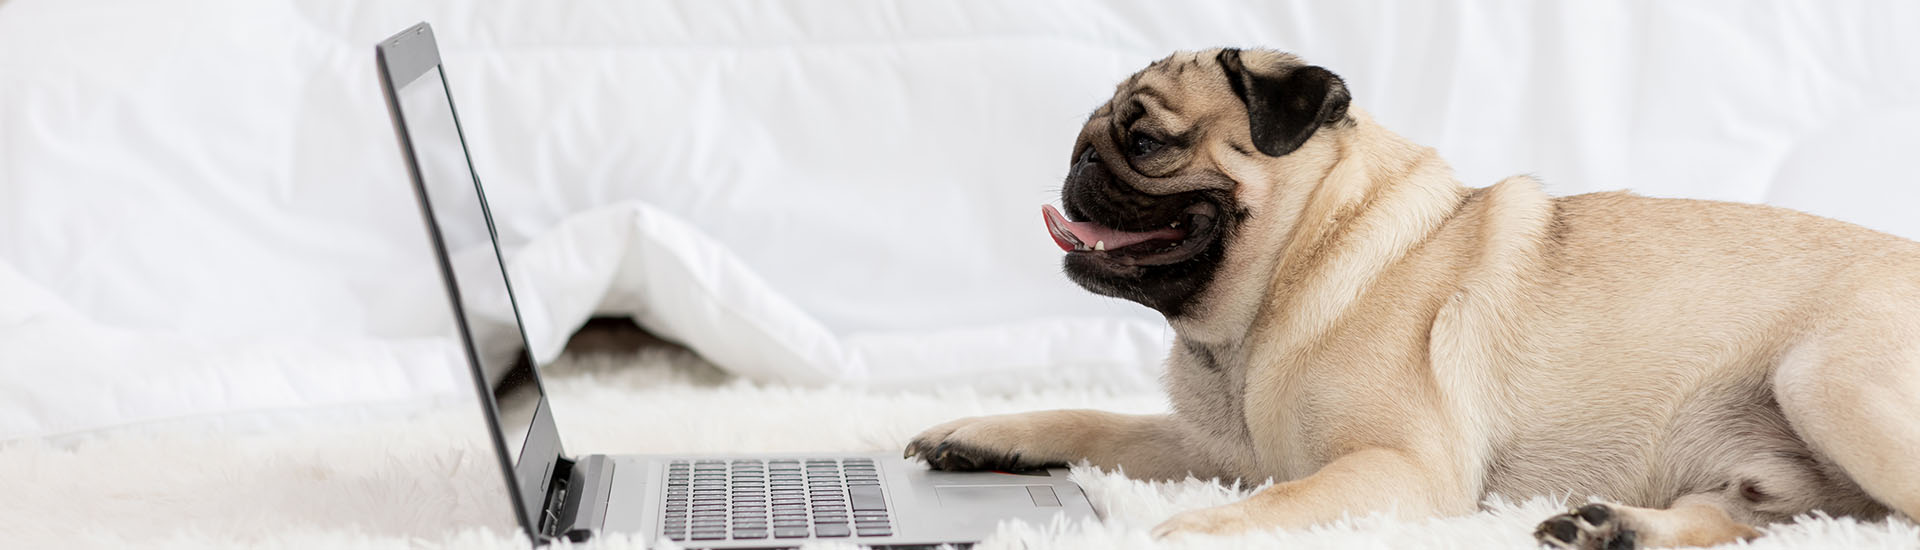 pug on bed with computer